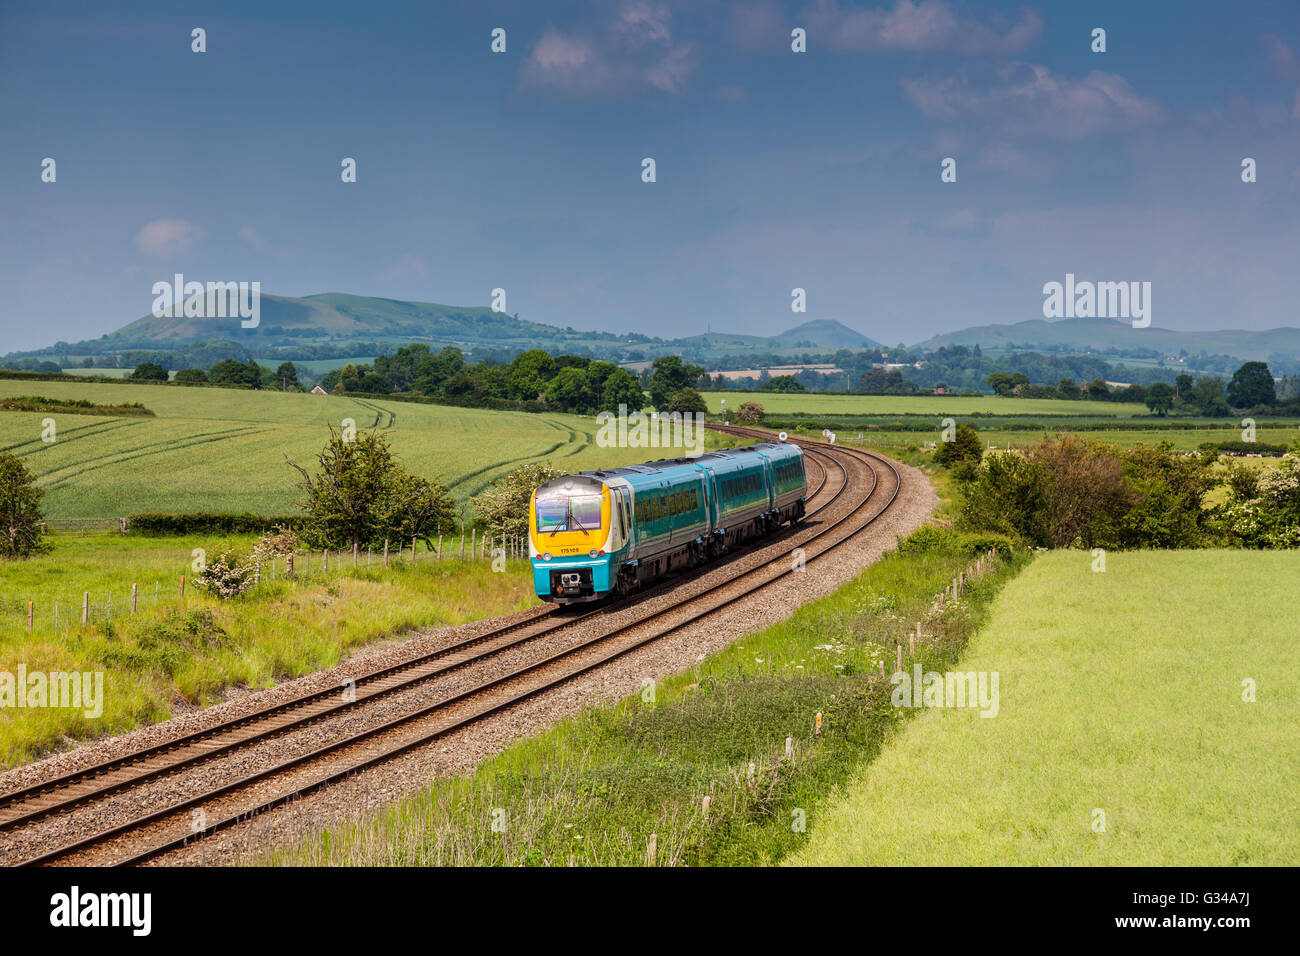 Arriva Trains Wales service on the Marches Line (Cardiff to Manchester) between Craven Arms And Church Stretton, Shropshire Stock Photo